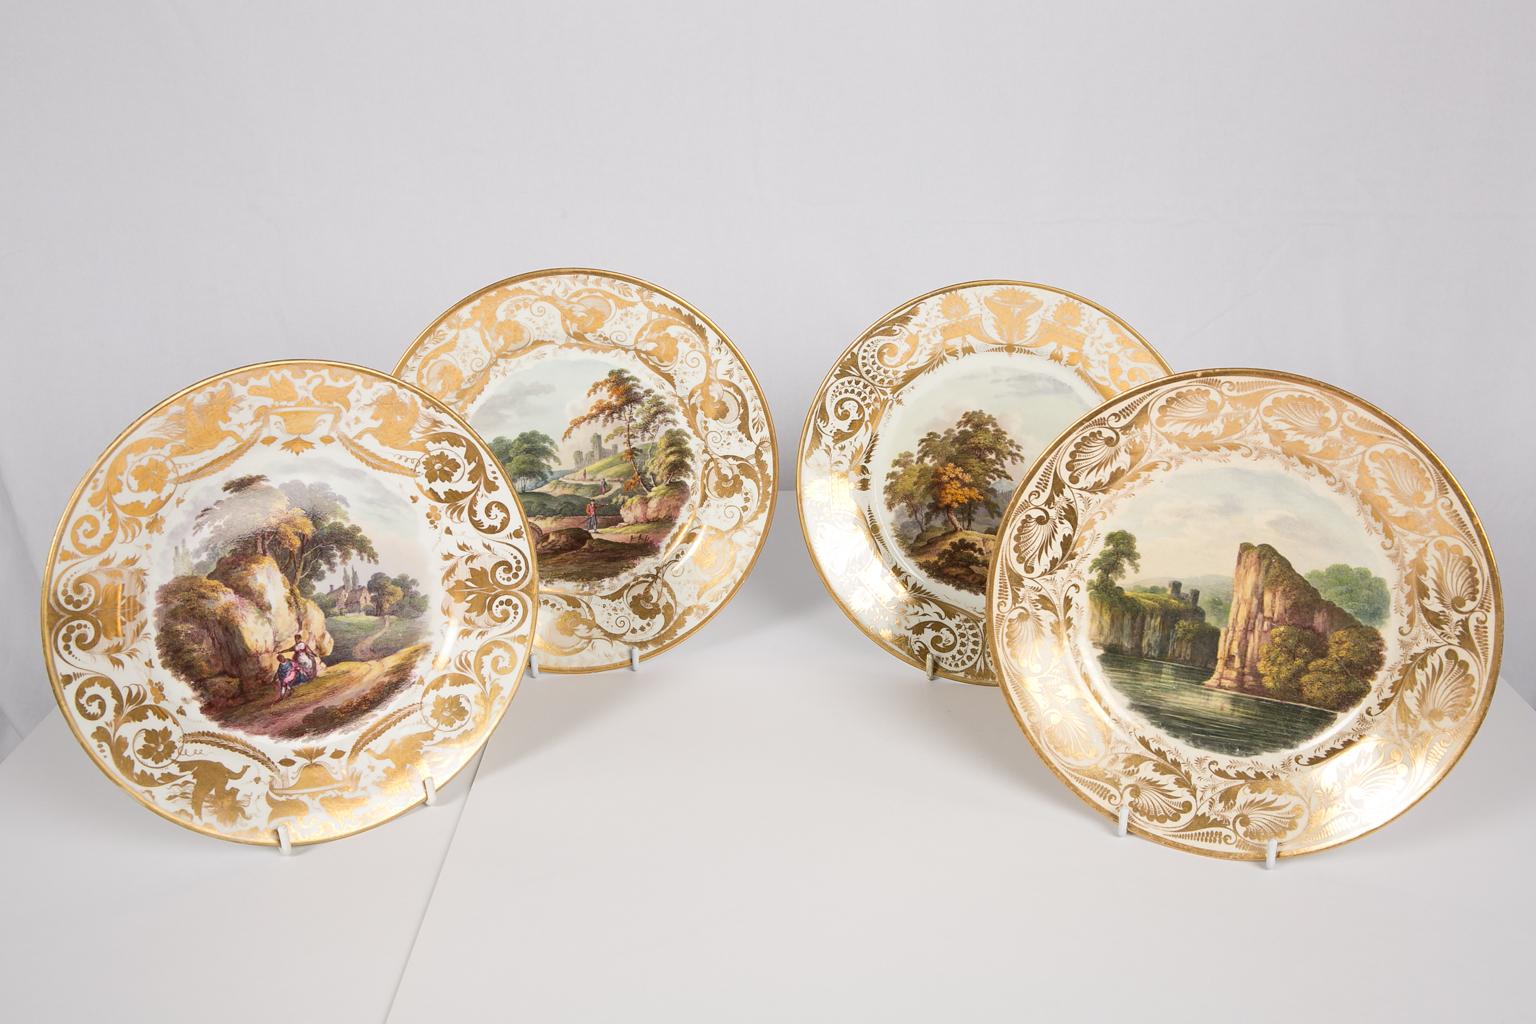 An exquisite set of four Derby antique porcelain dishes with hand-painted landscapes. Each dish with a romantic view of a named landscape in either Britain or Italy. The scenes emphasize the emotion evoked by the beauty of nature. The dishes have